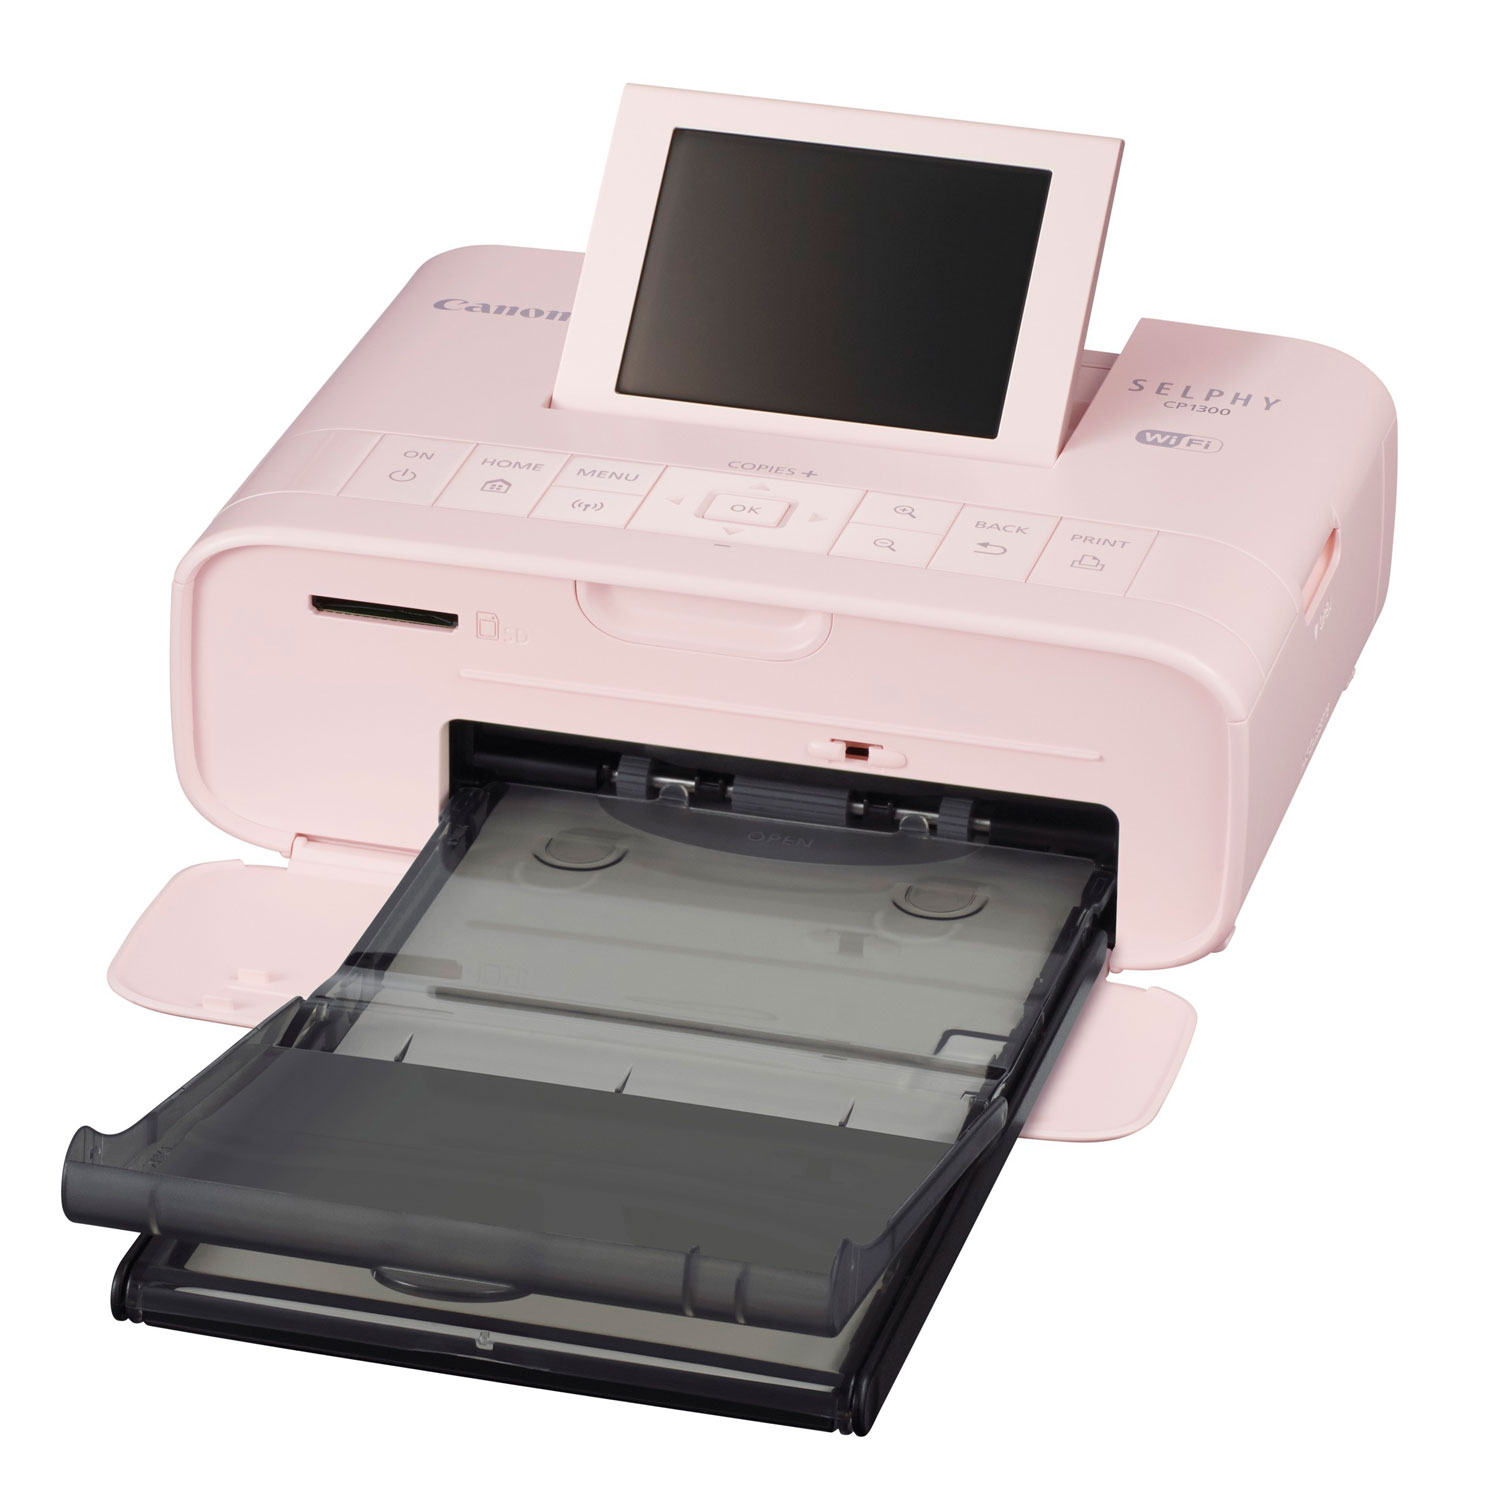 Grondig injecteren ondergronds Canon SELPHY CP1300 Compact Photo Printer (PINK) – Curven Store